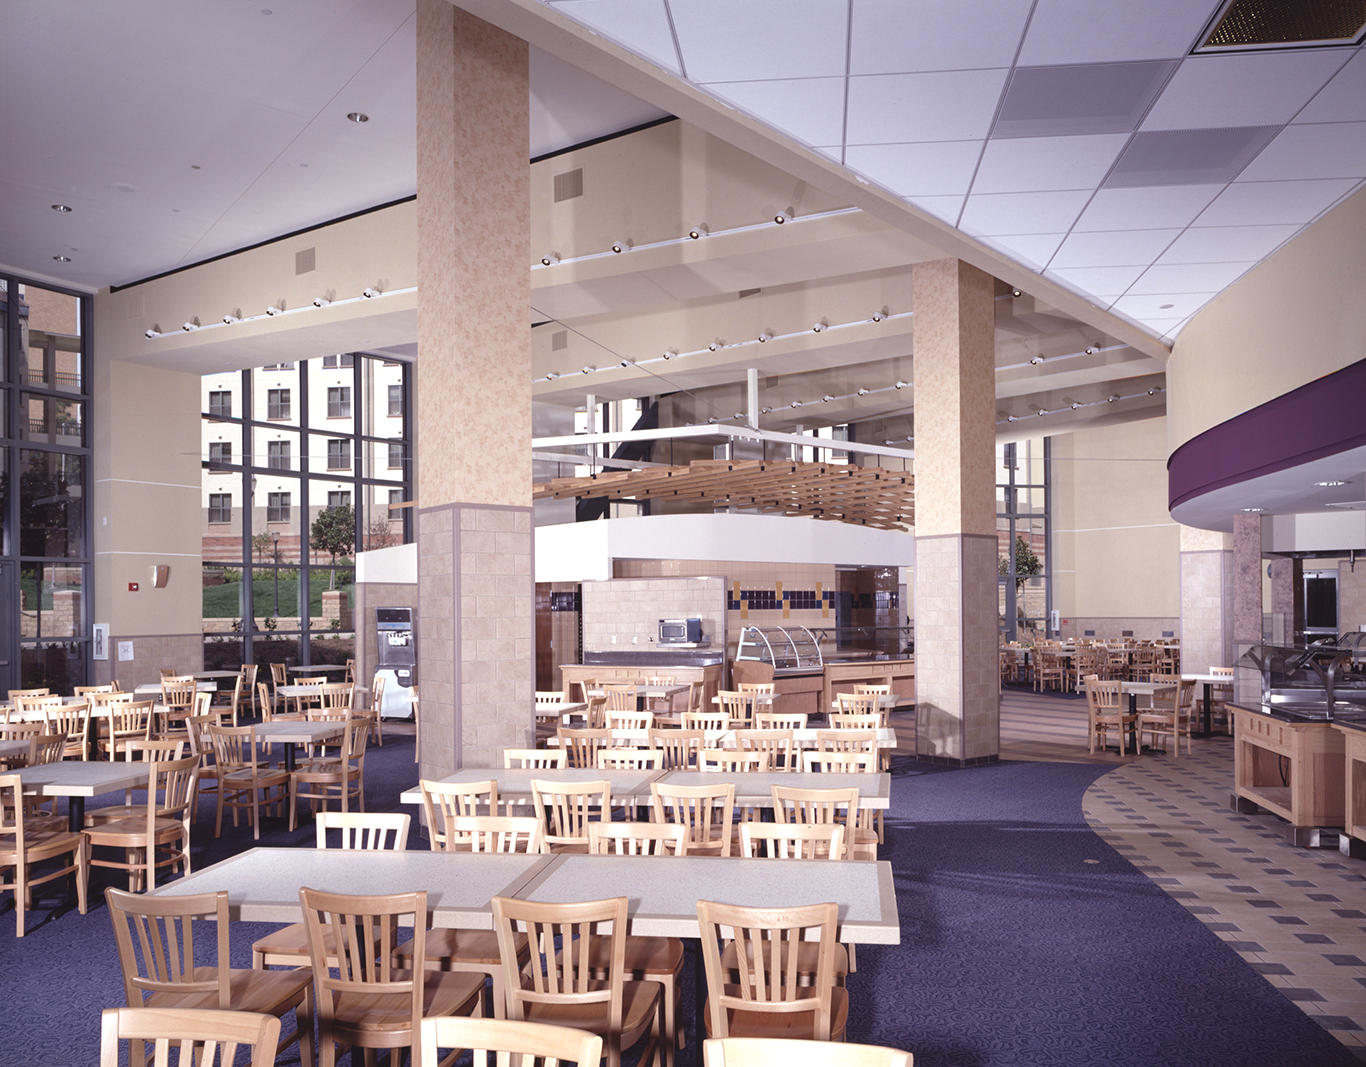 Food court at University of California - Los Angeles